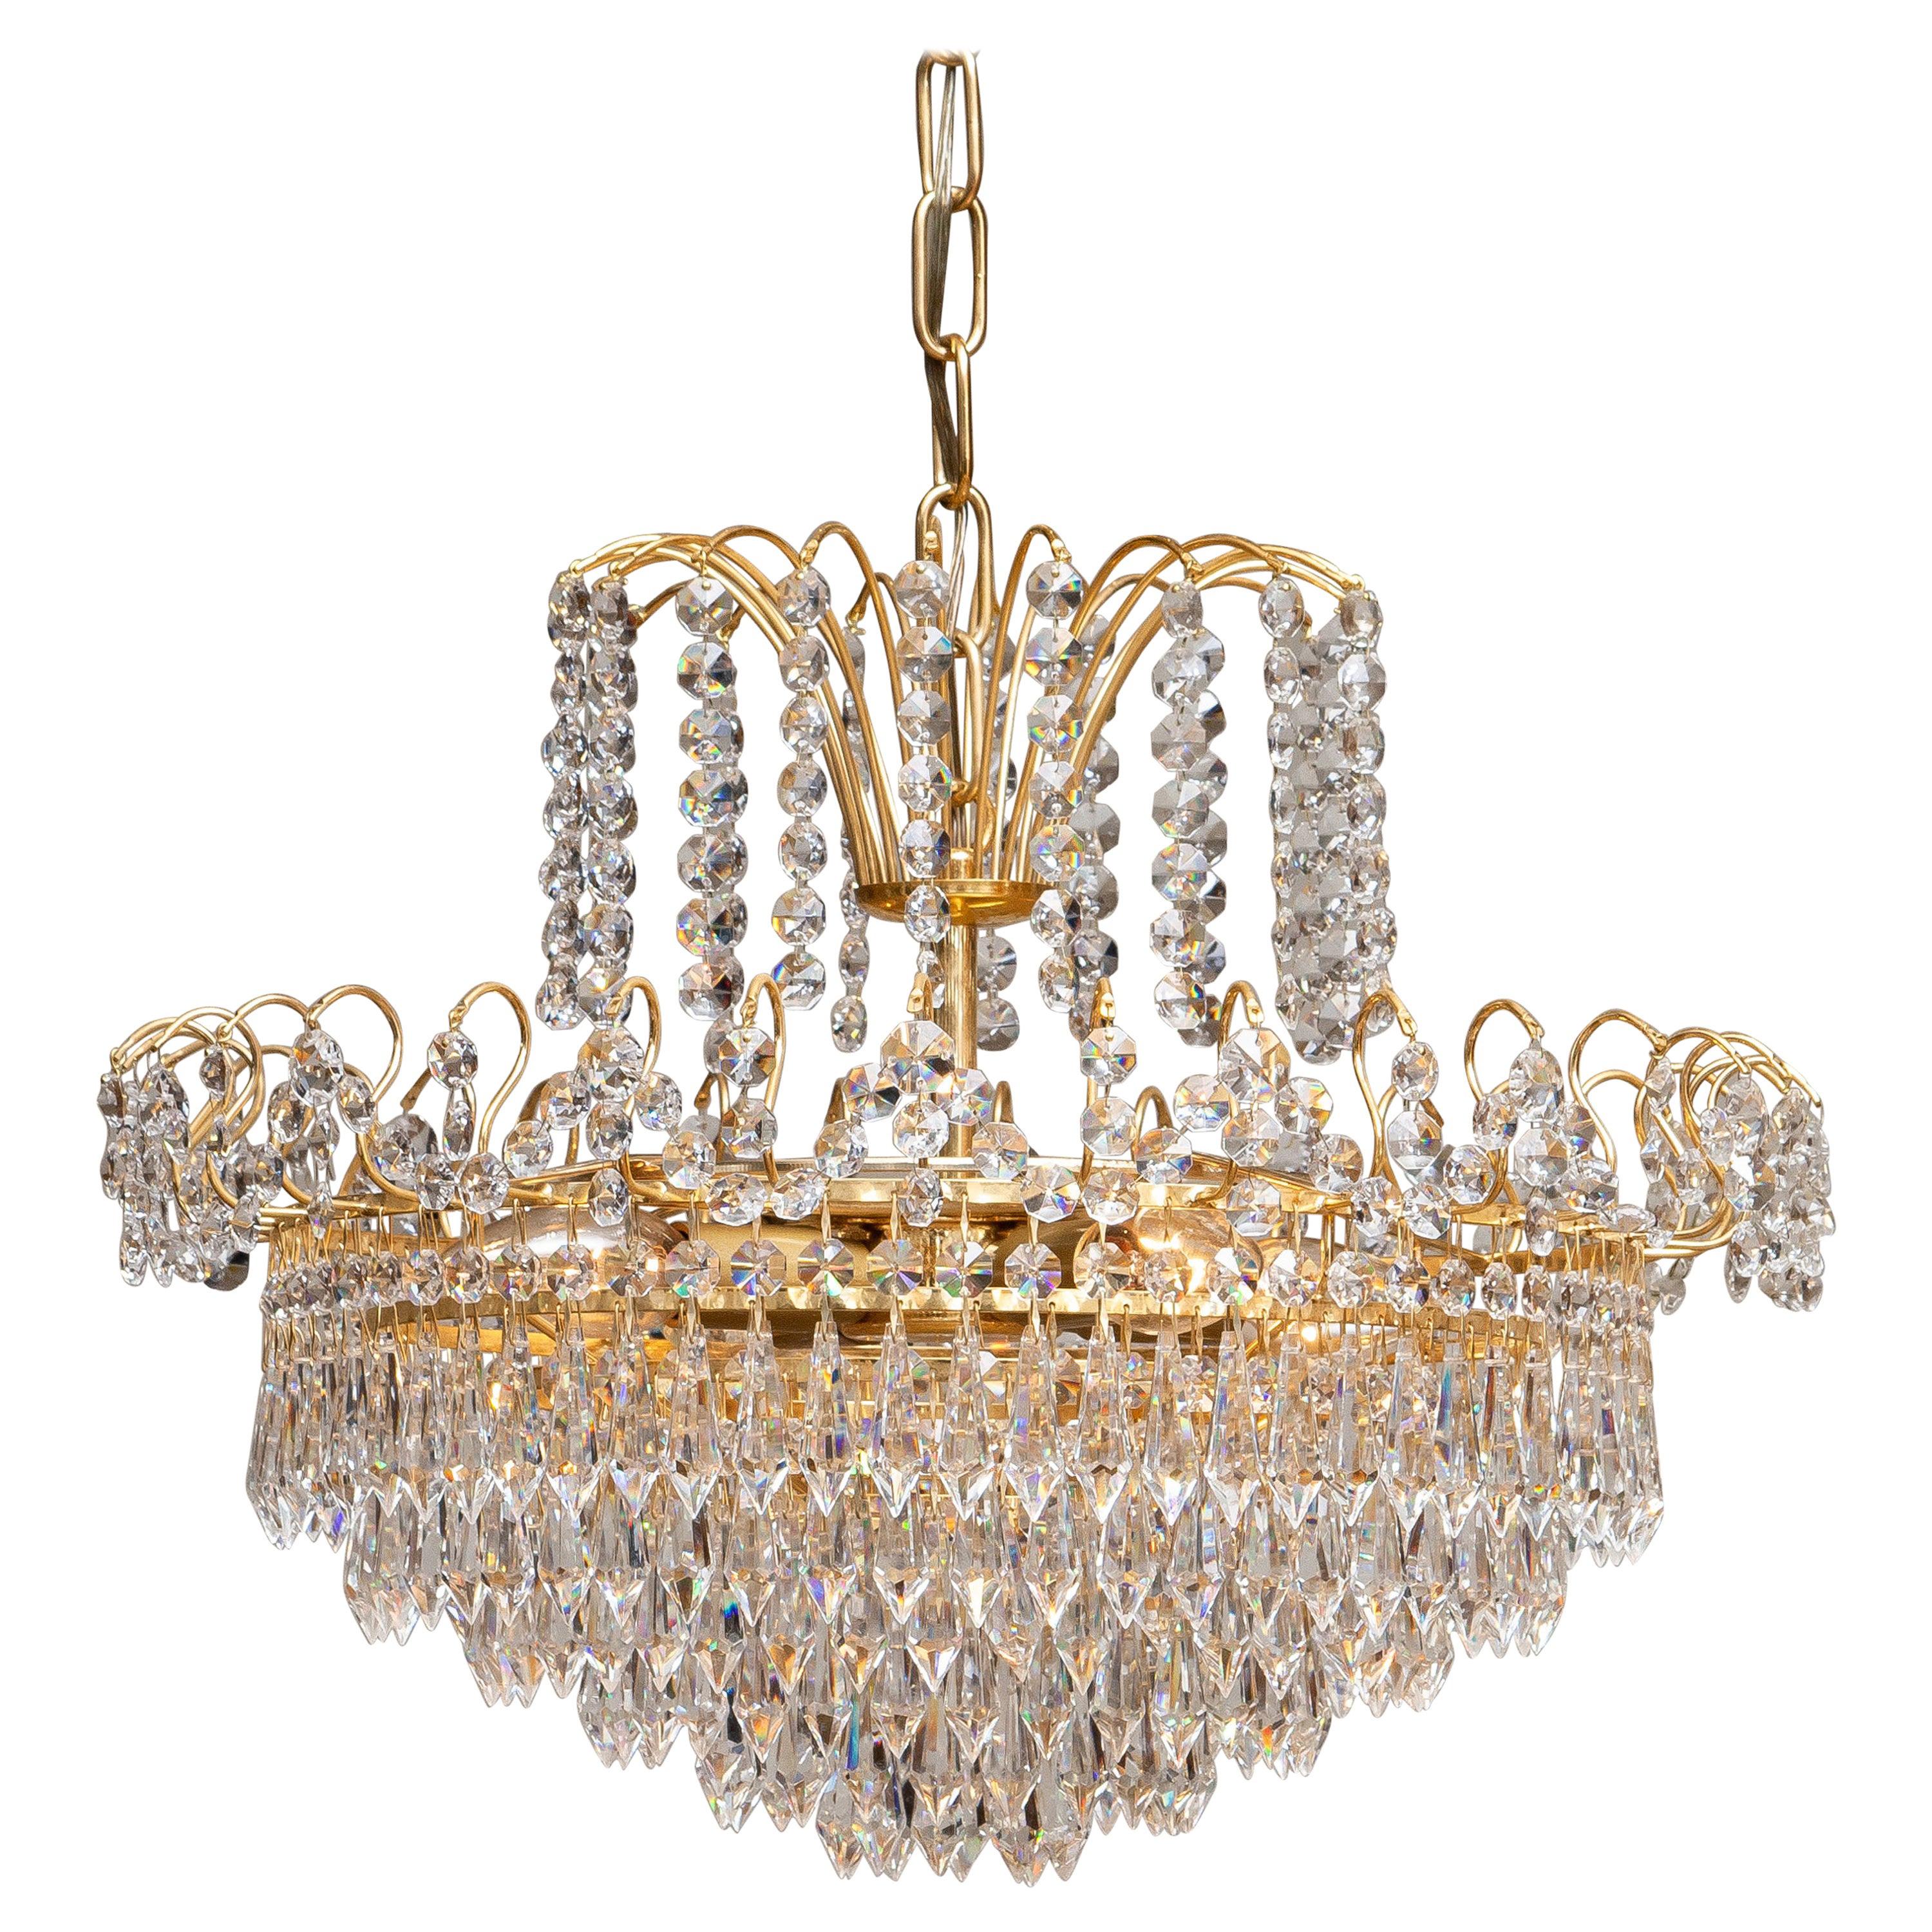 1970s, Gold-Plated and Faceted Crystal Chandelier Attributed to Rejmyre Sweden